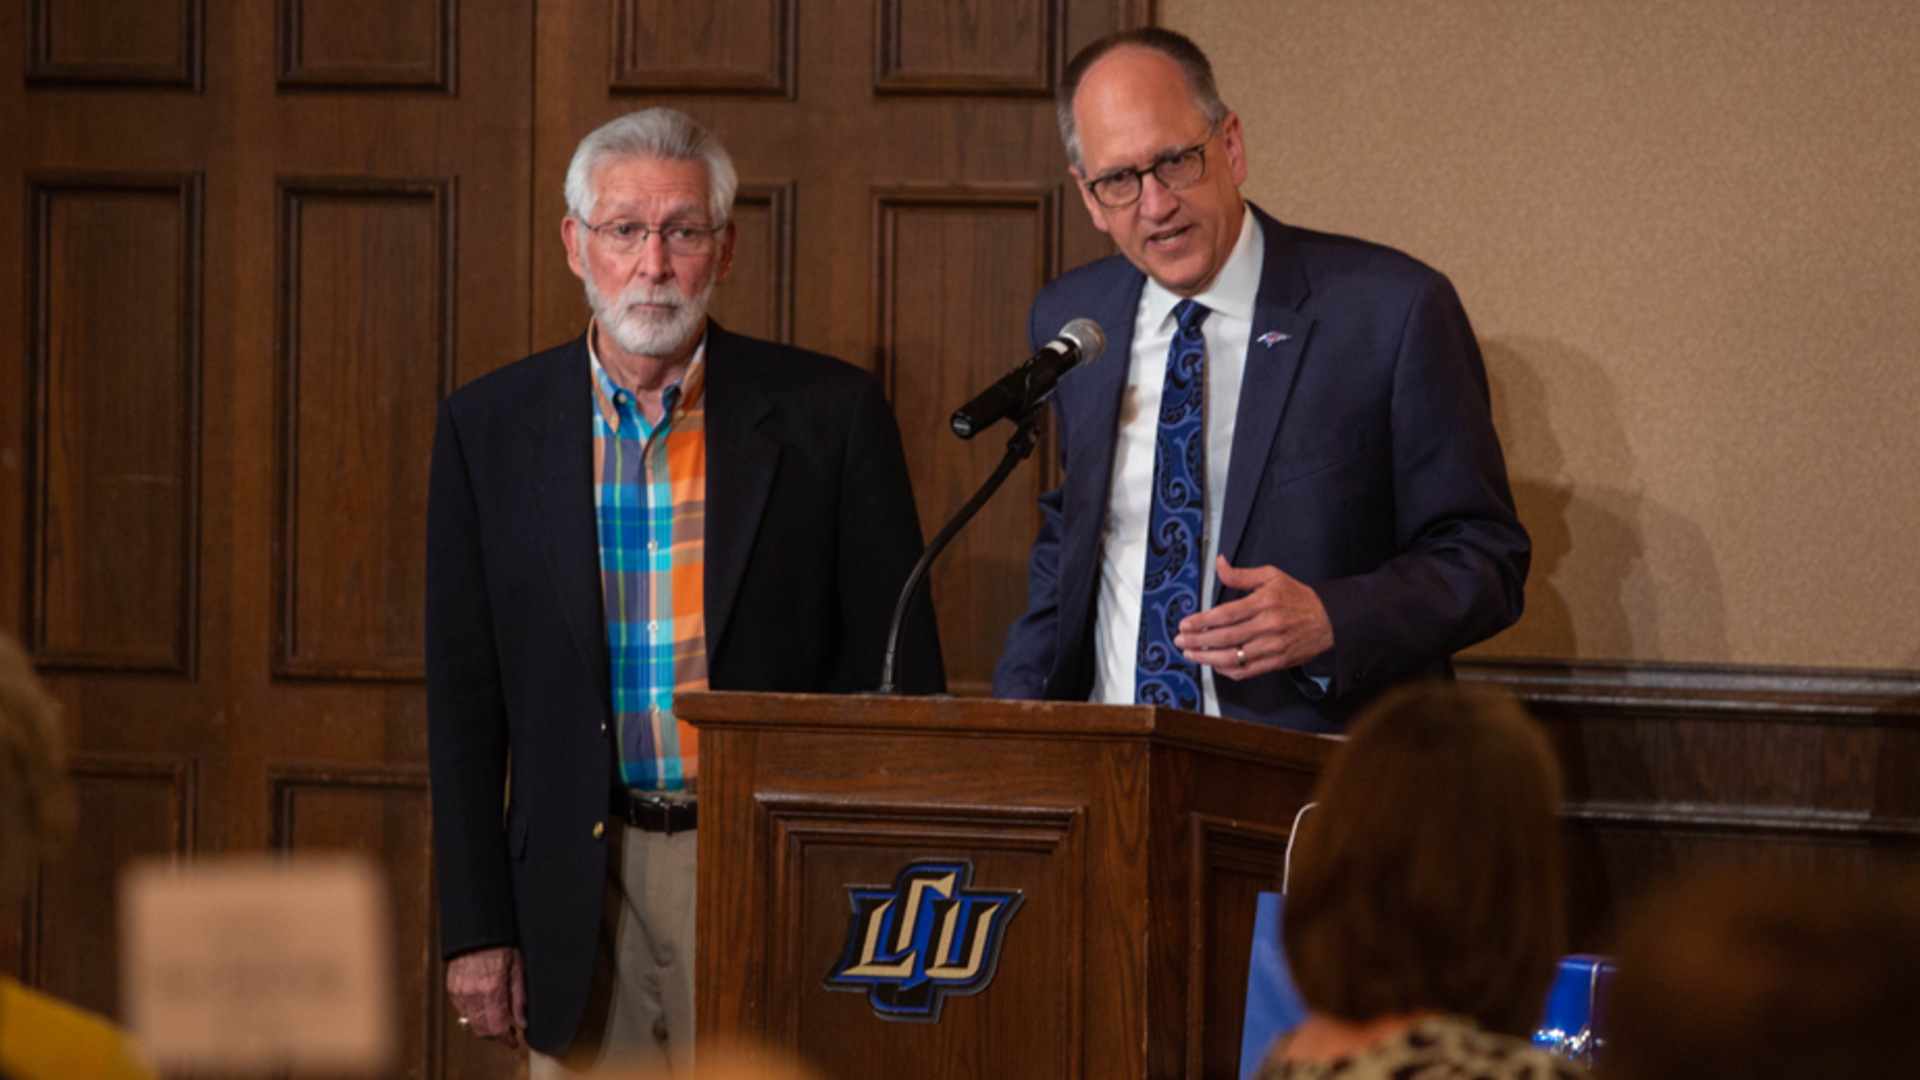 President Perrin and Dr. Don Williams at the LCU podium